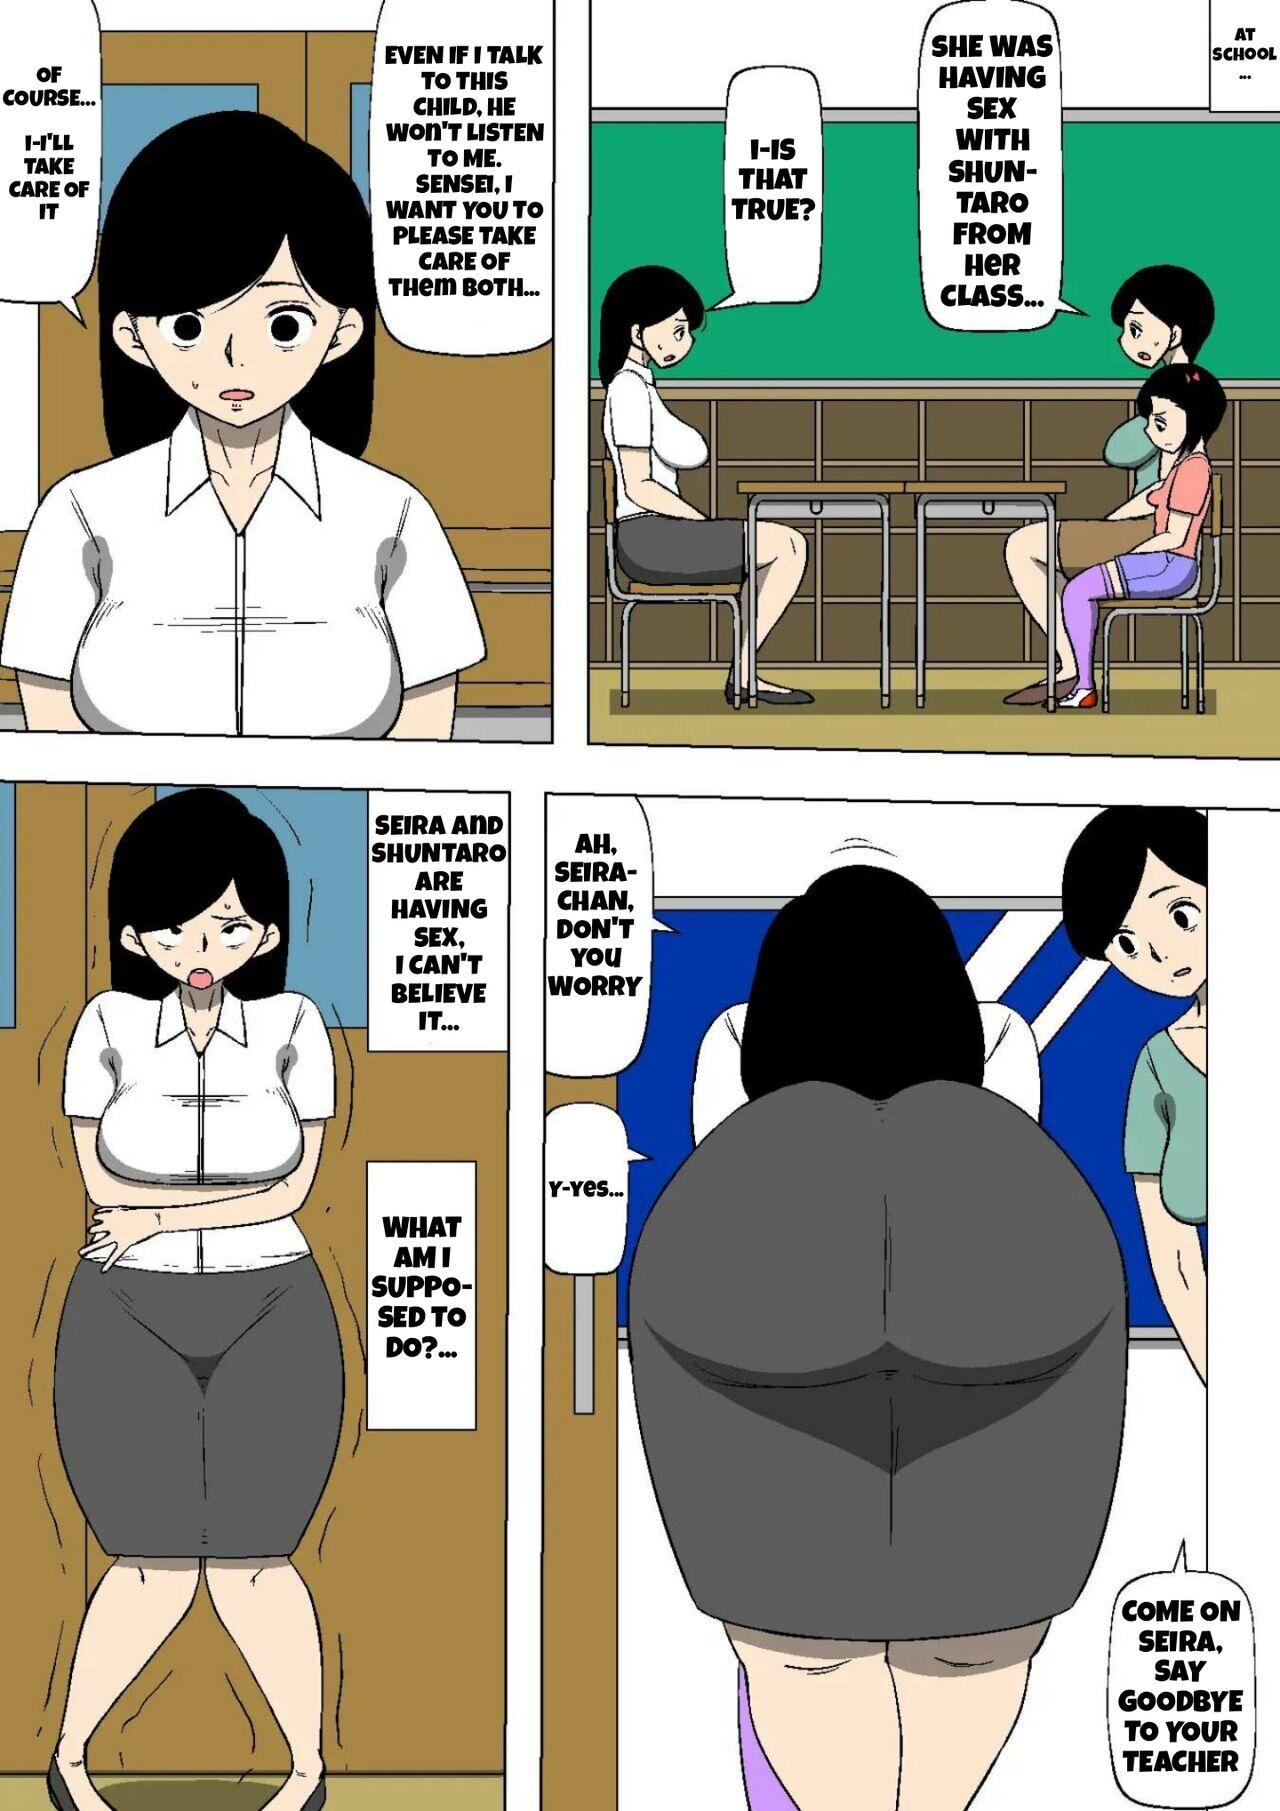 Tugging Tsuma ga Musume no Tomodachi to SEX shite ita | My wife has sex with my daughter's friend Face - Page 7